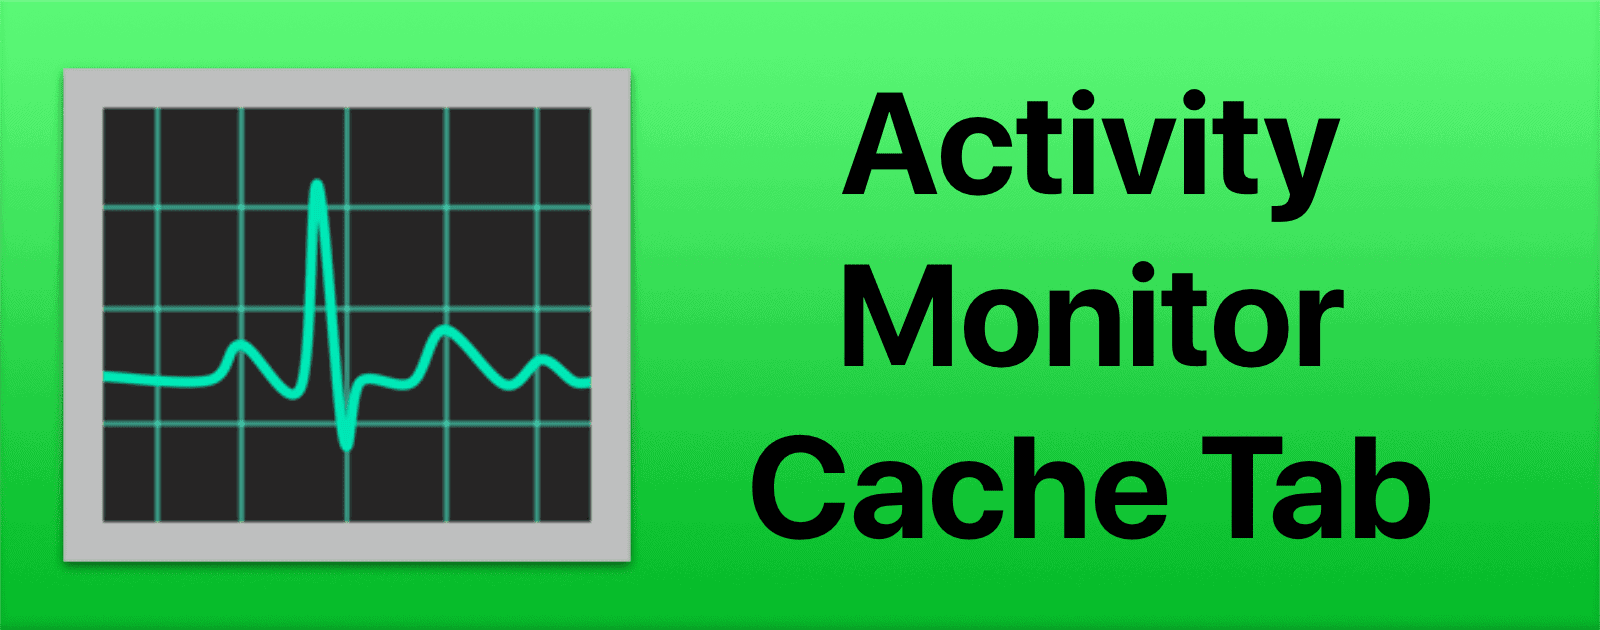 There’s a New Tab for Content Caching in the Mac Activity Monitor